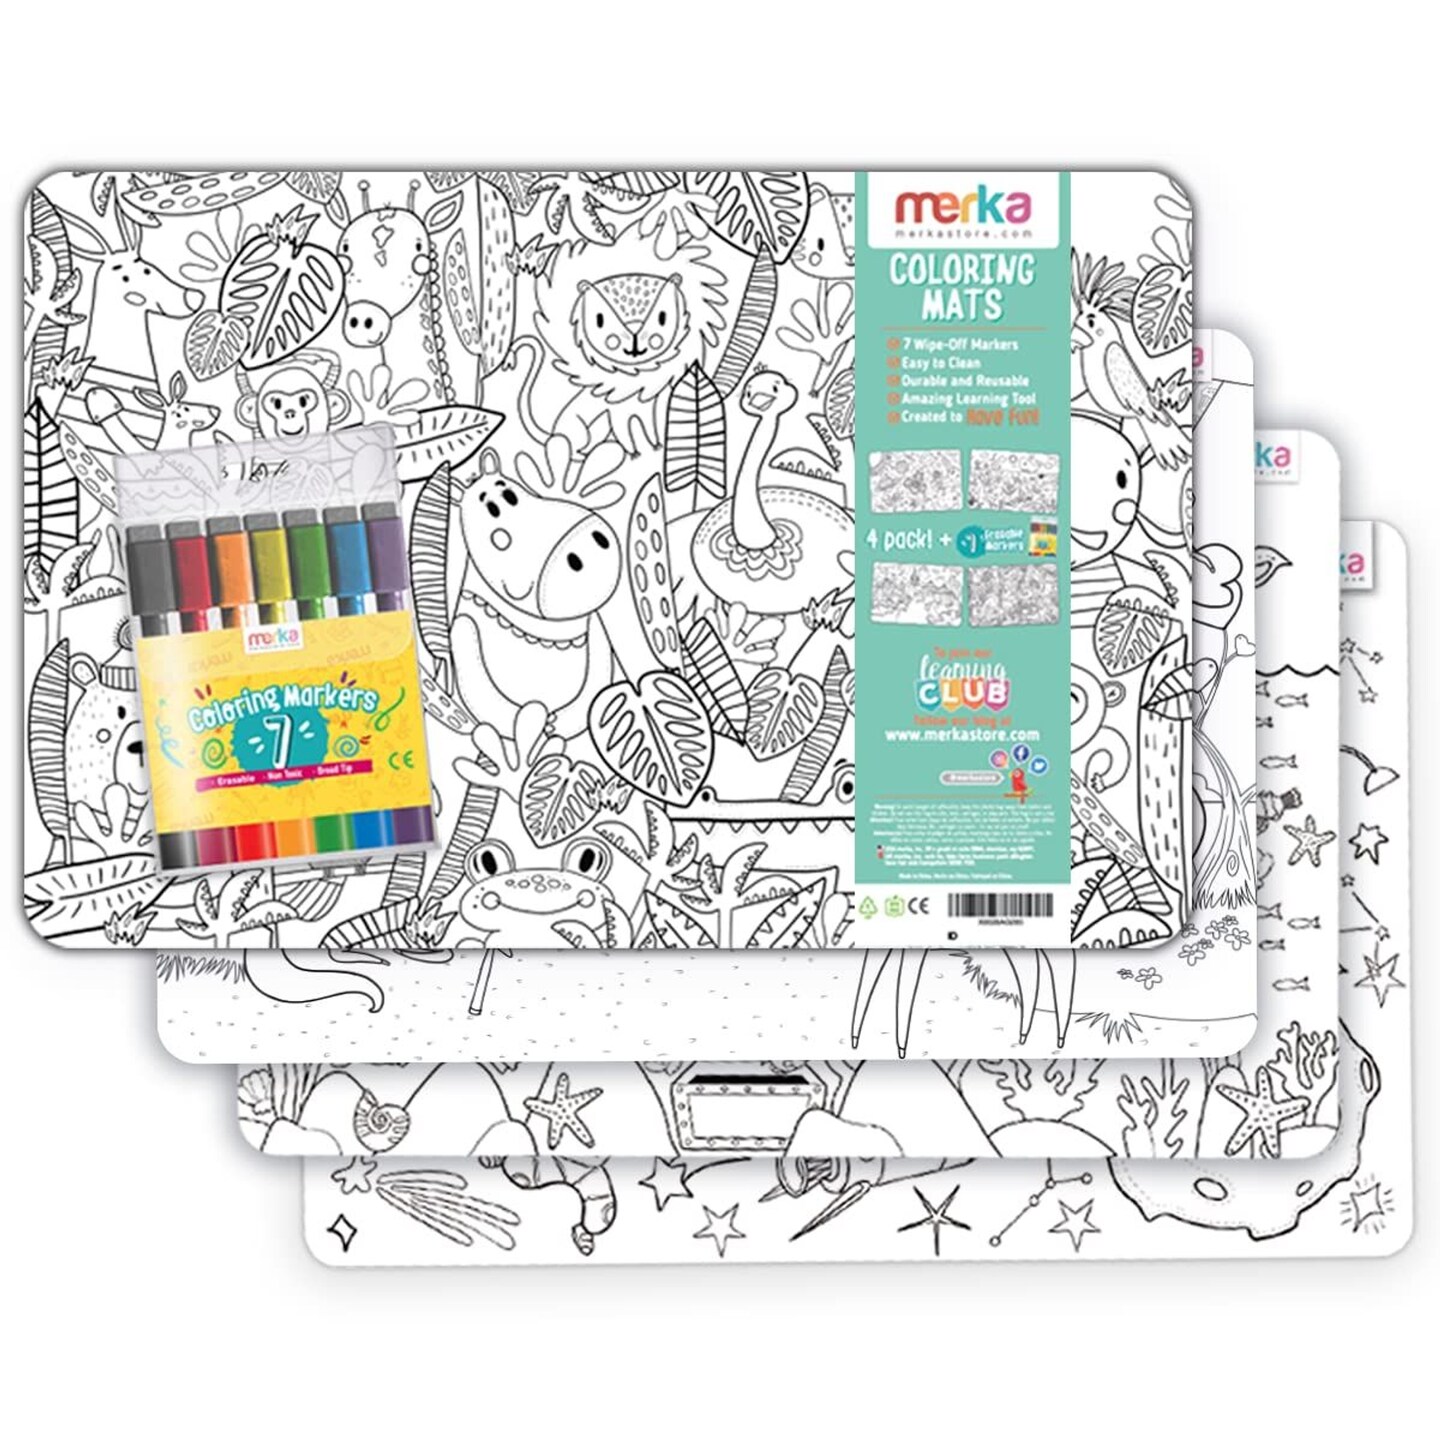 merka Kids Placemats Toddler Essentials Coloring Placemats For Kids Coloring Tablecloth For Kids Set Of 4 Mats With 7 Markers Jungle Space Sea Unicorns